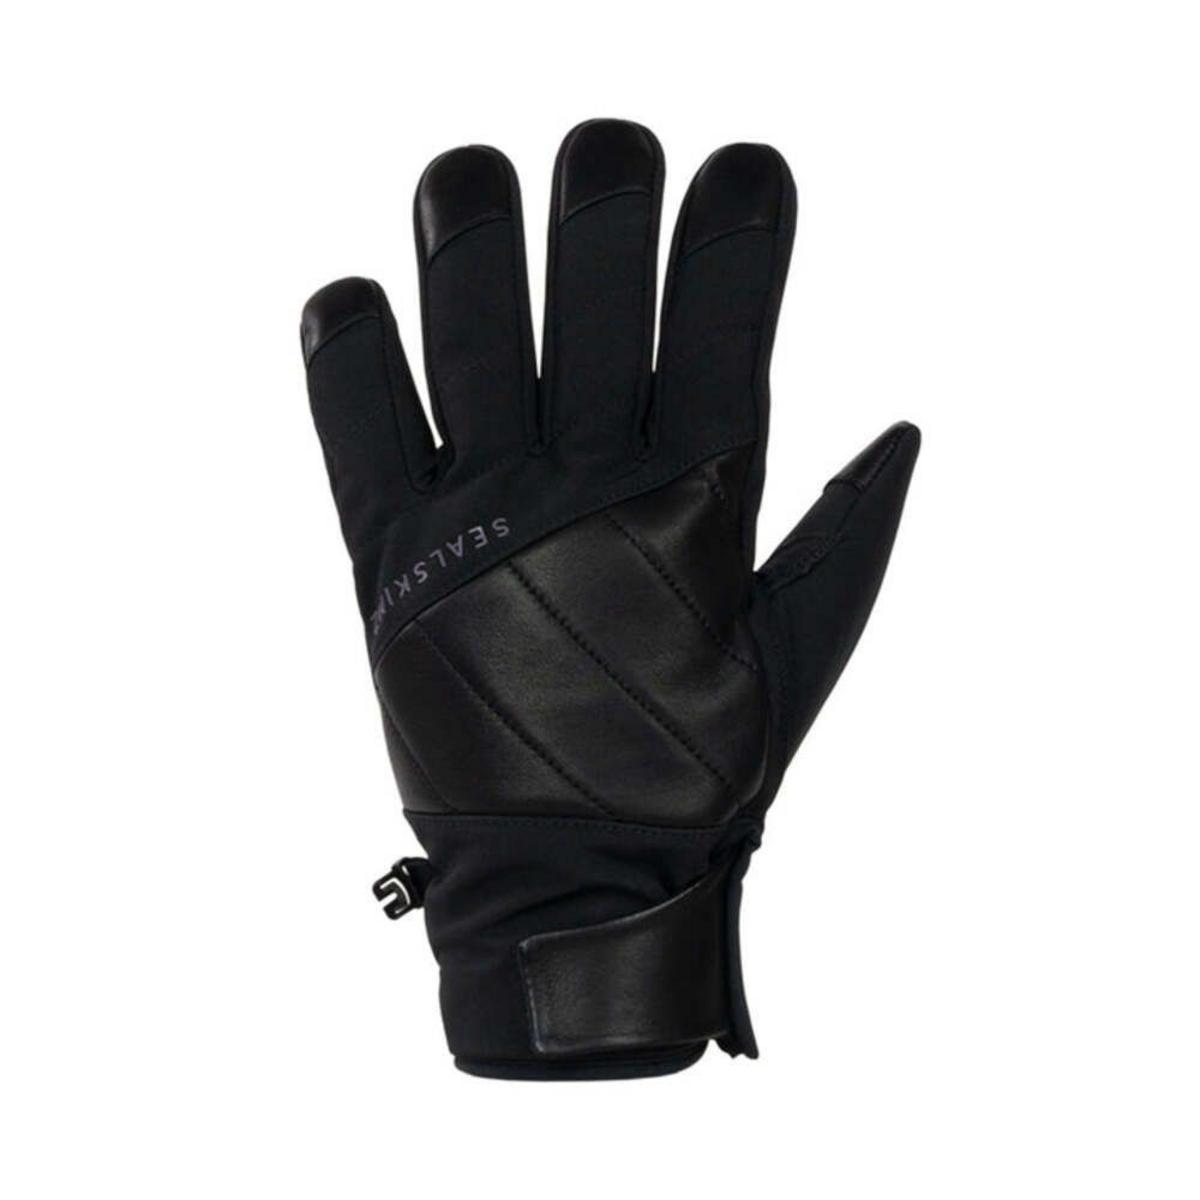 SealSkinz Rocklands Waterproof Extreme Cold Weather Insulated Gloves with Fusion Control